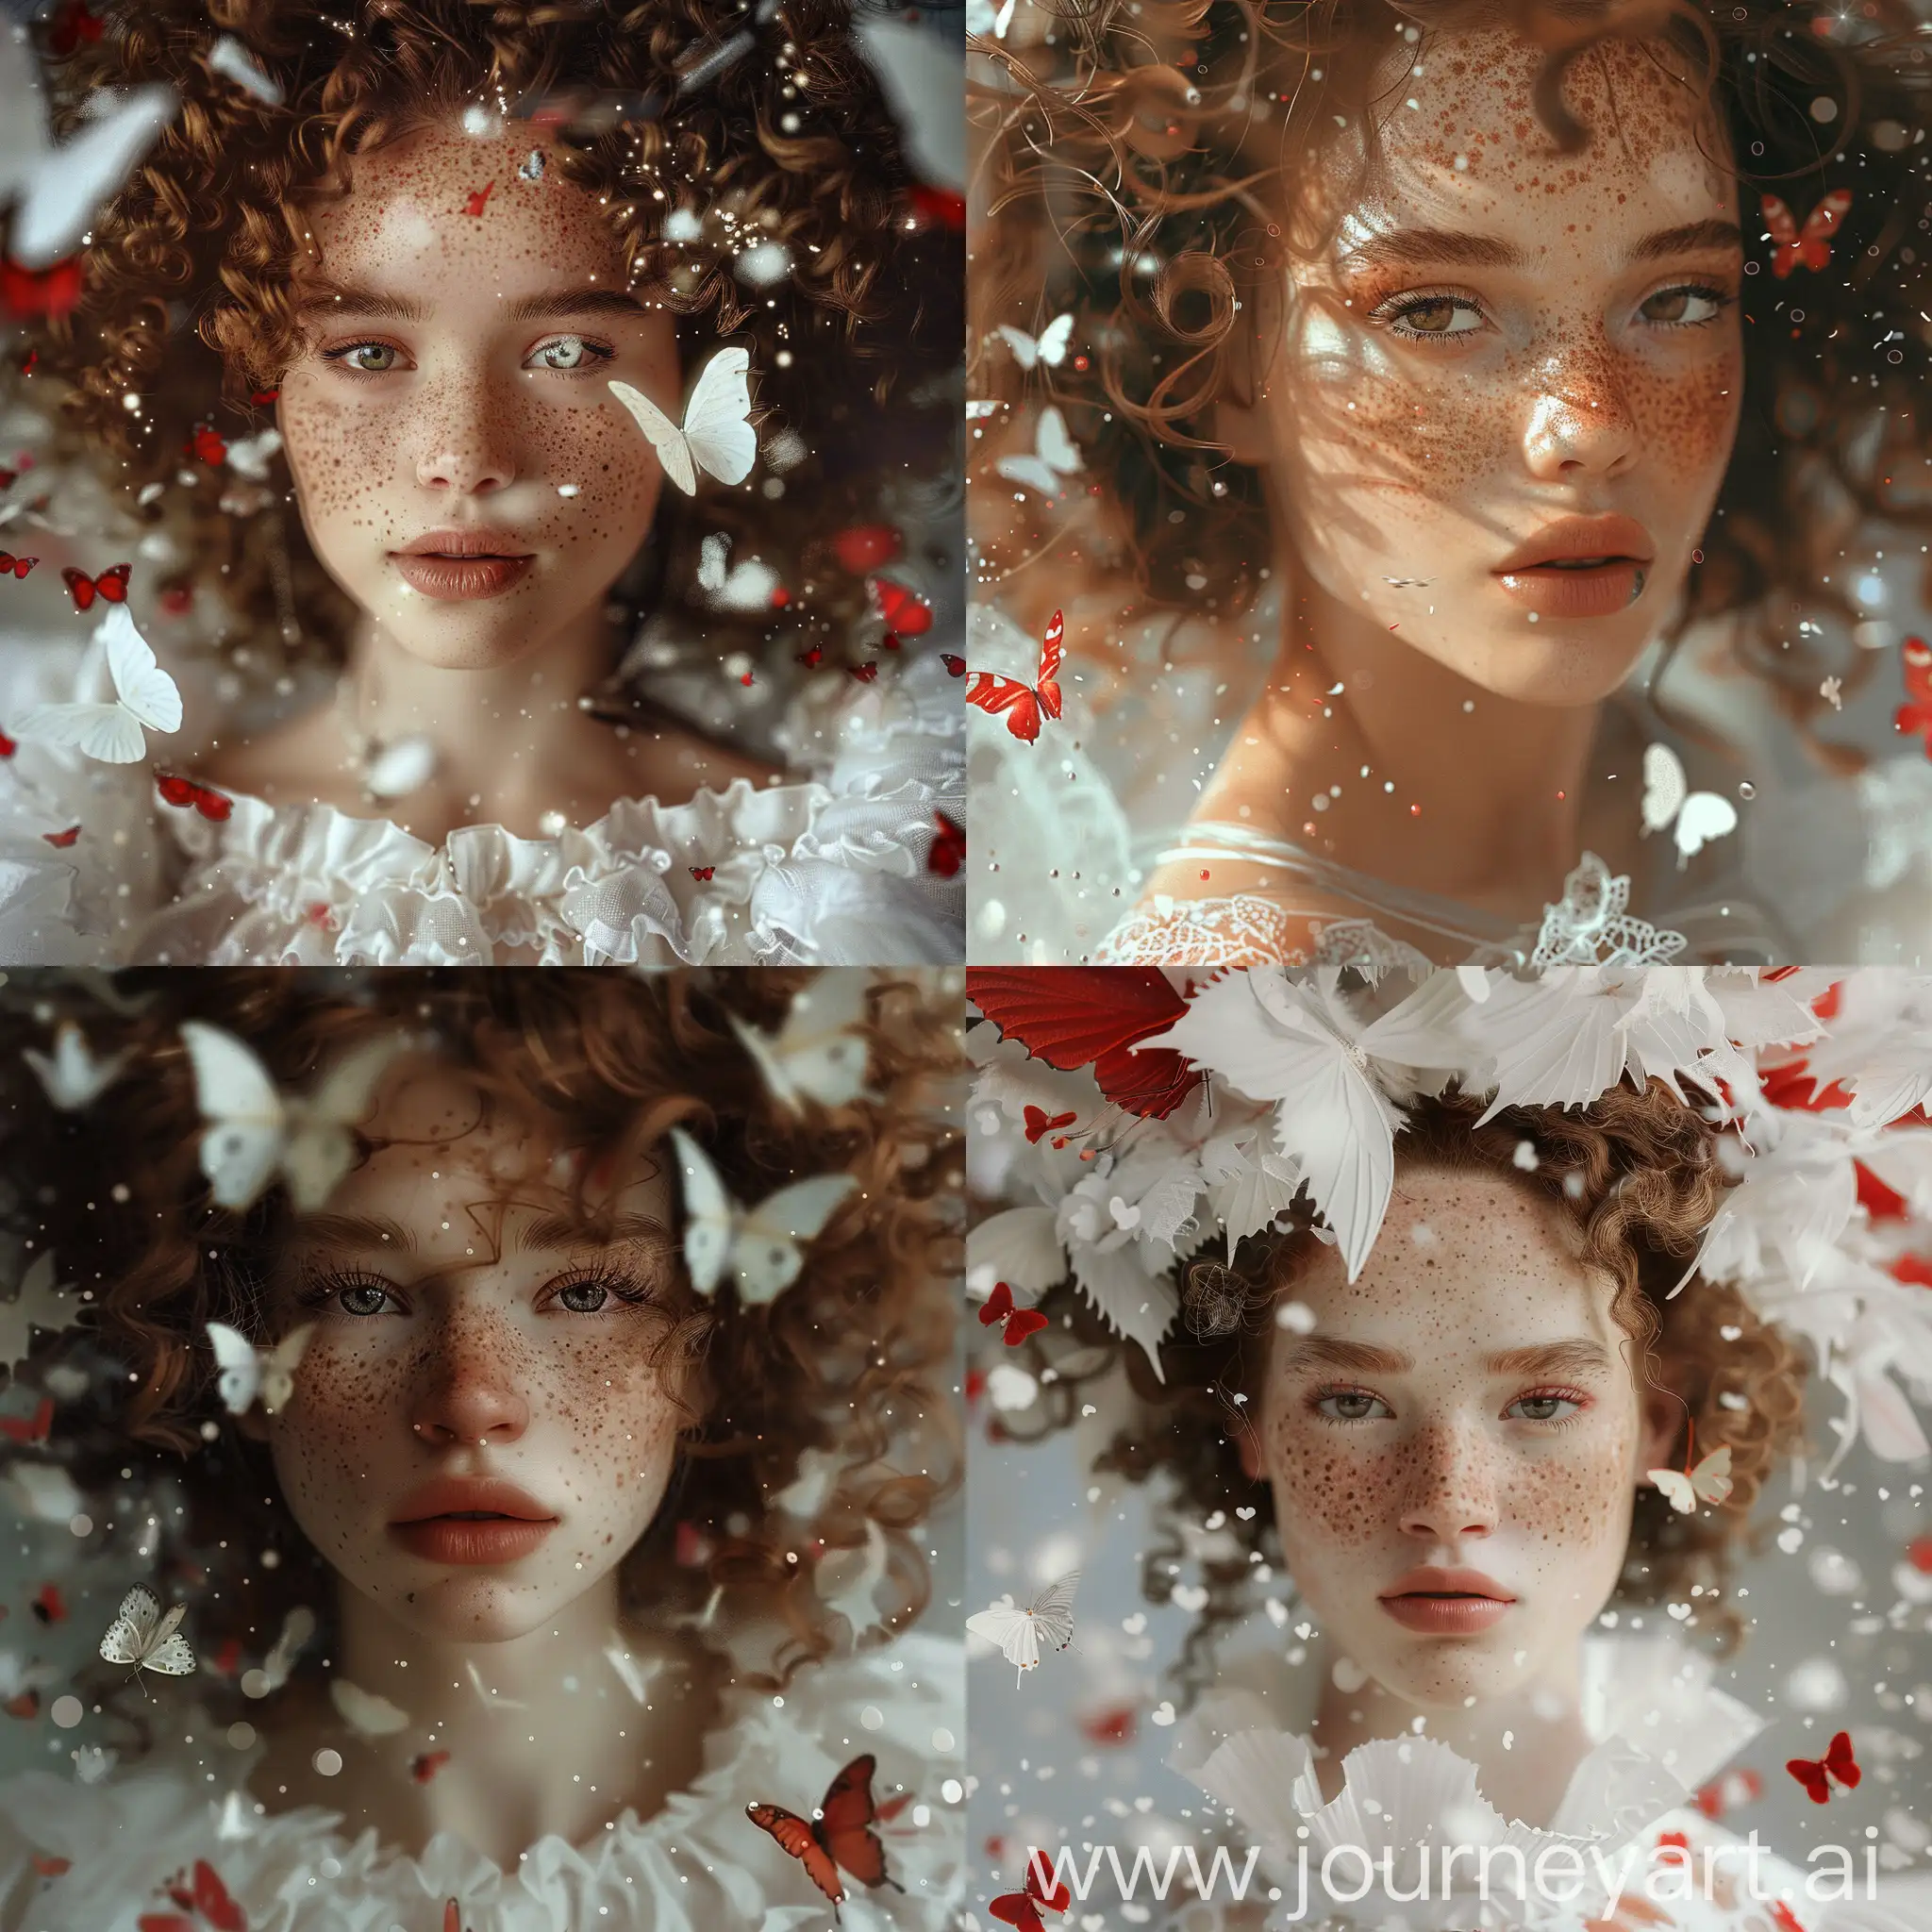 Ultra-Realistic-Bohemian-Fashion-Portrait-of-a-Freckled-Girl-with-Butterflies